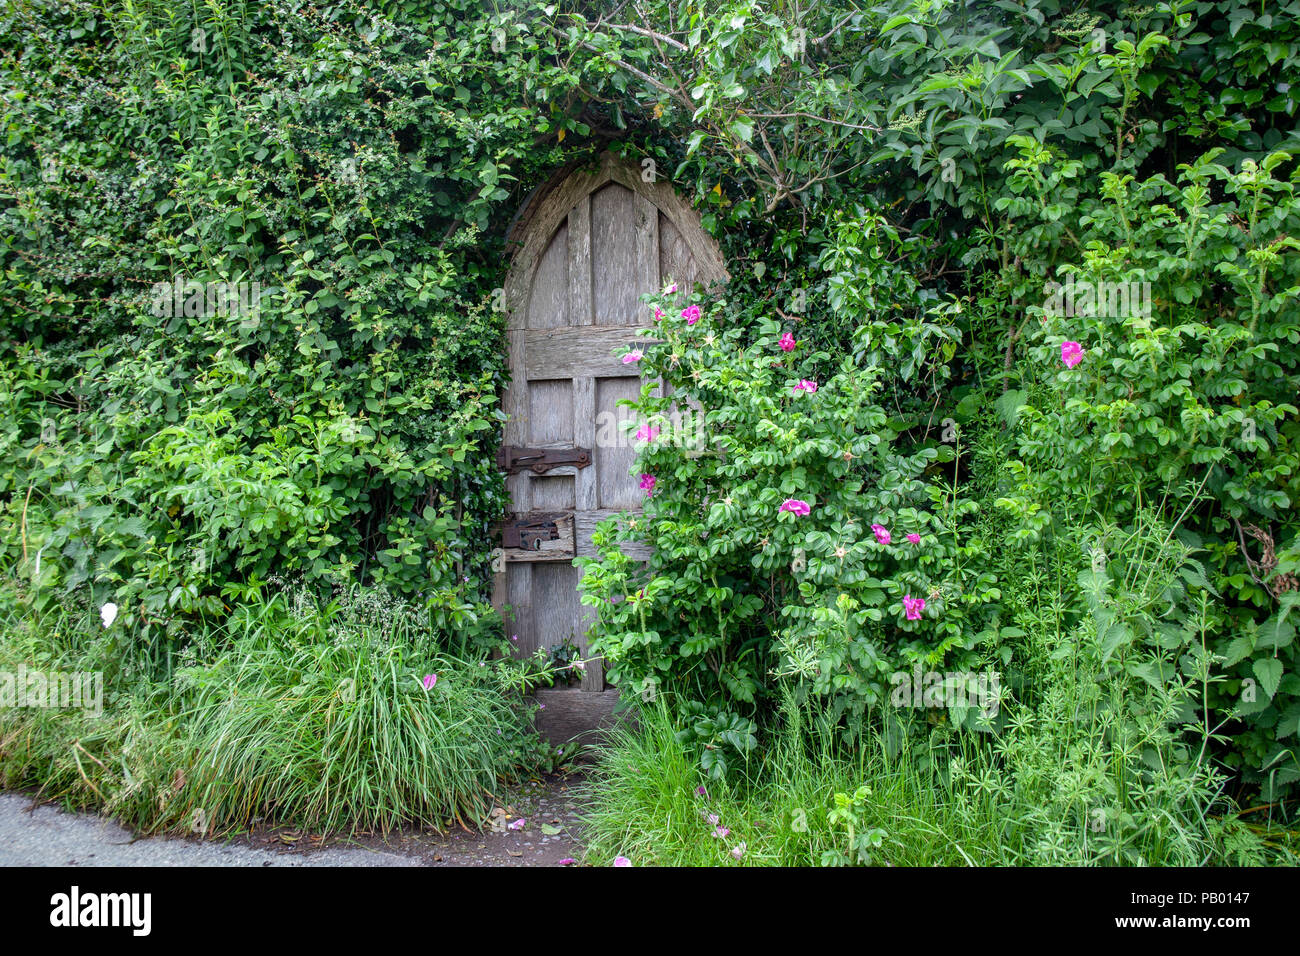 A very Old Arched Door with a broken lock and latch- half hidden by vegitation and rugosa roses. Stock Photo